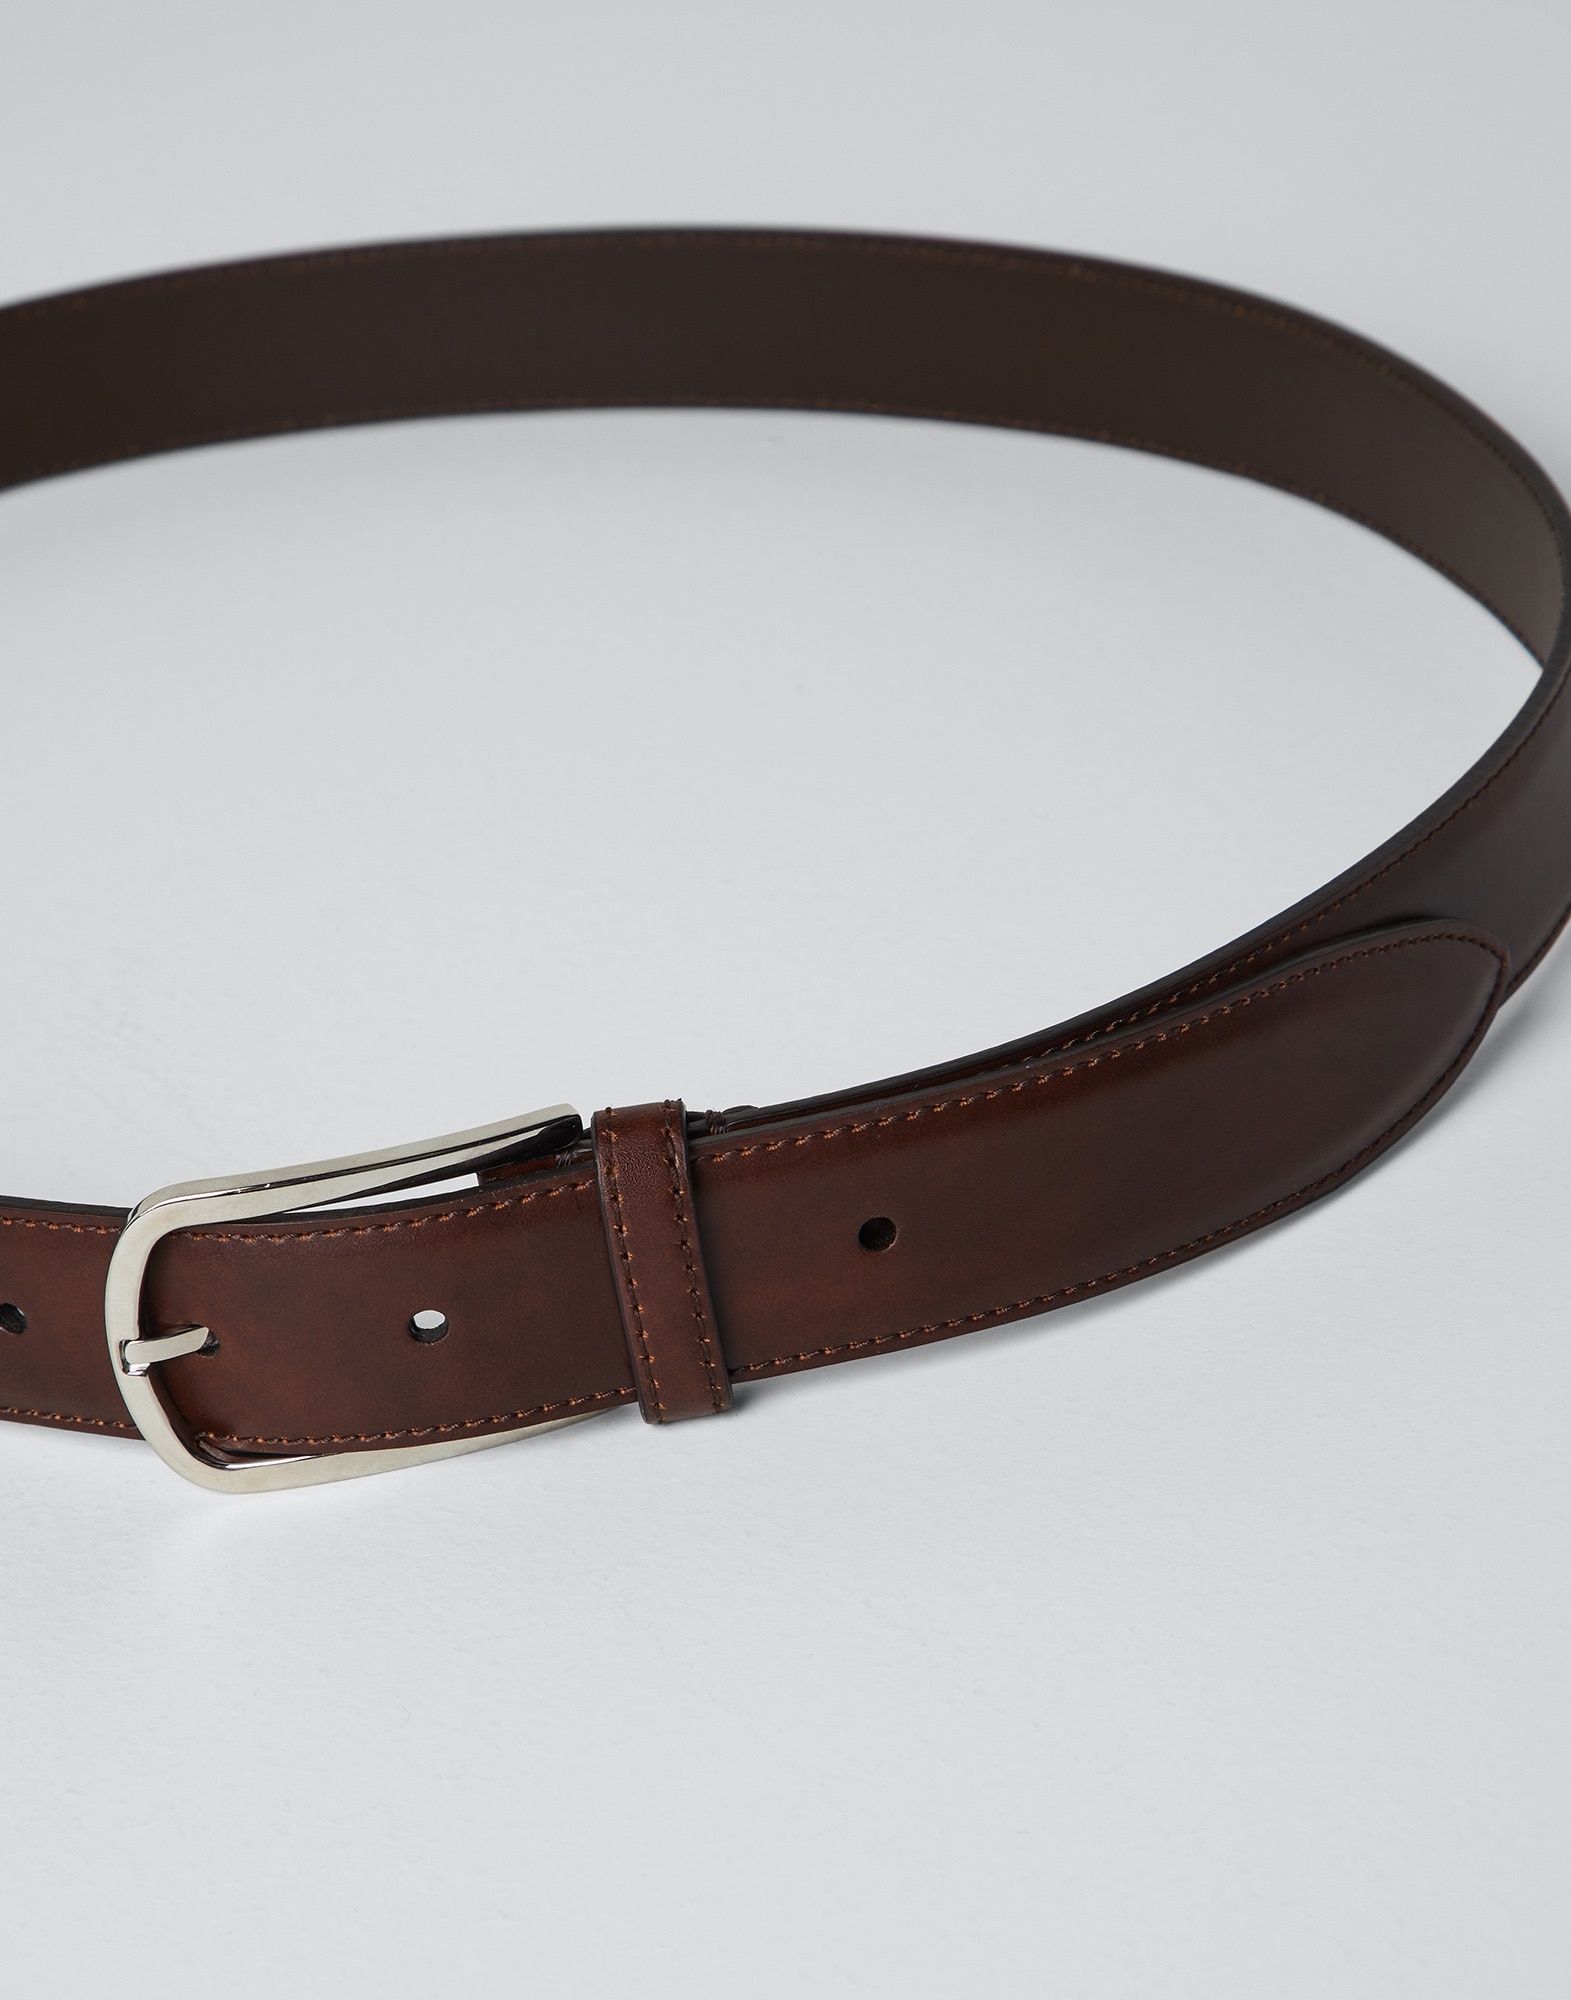 Formal calfskin belt with rounded buckle - 2